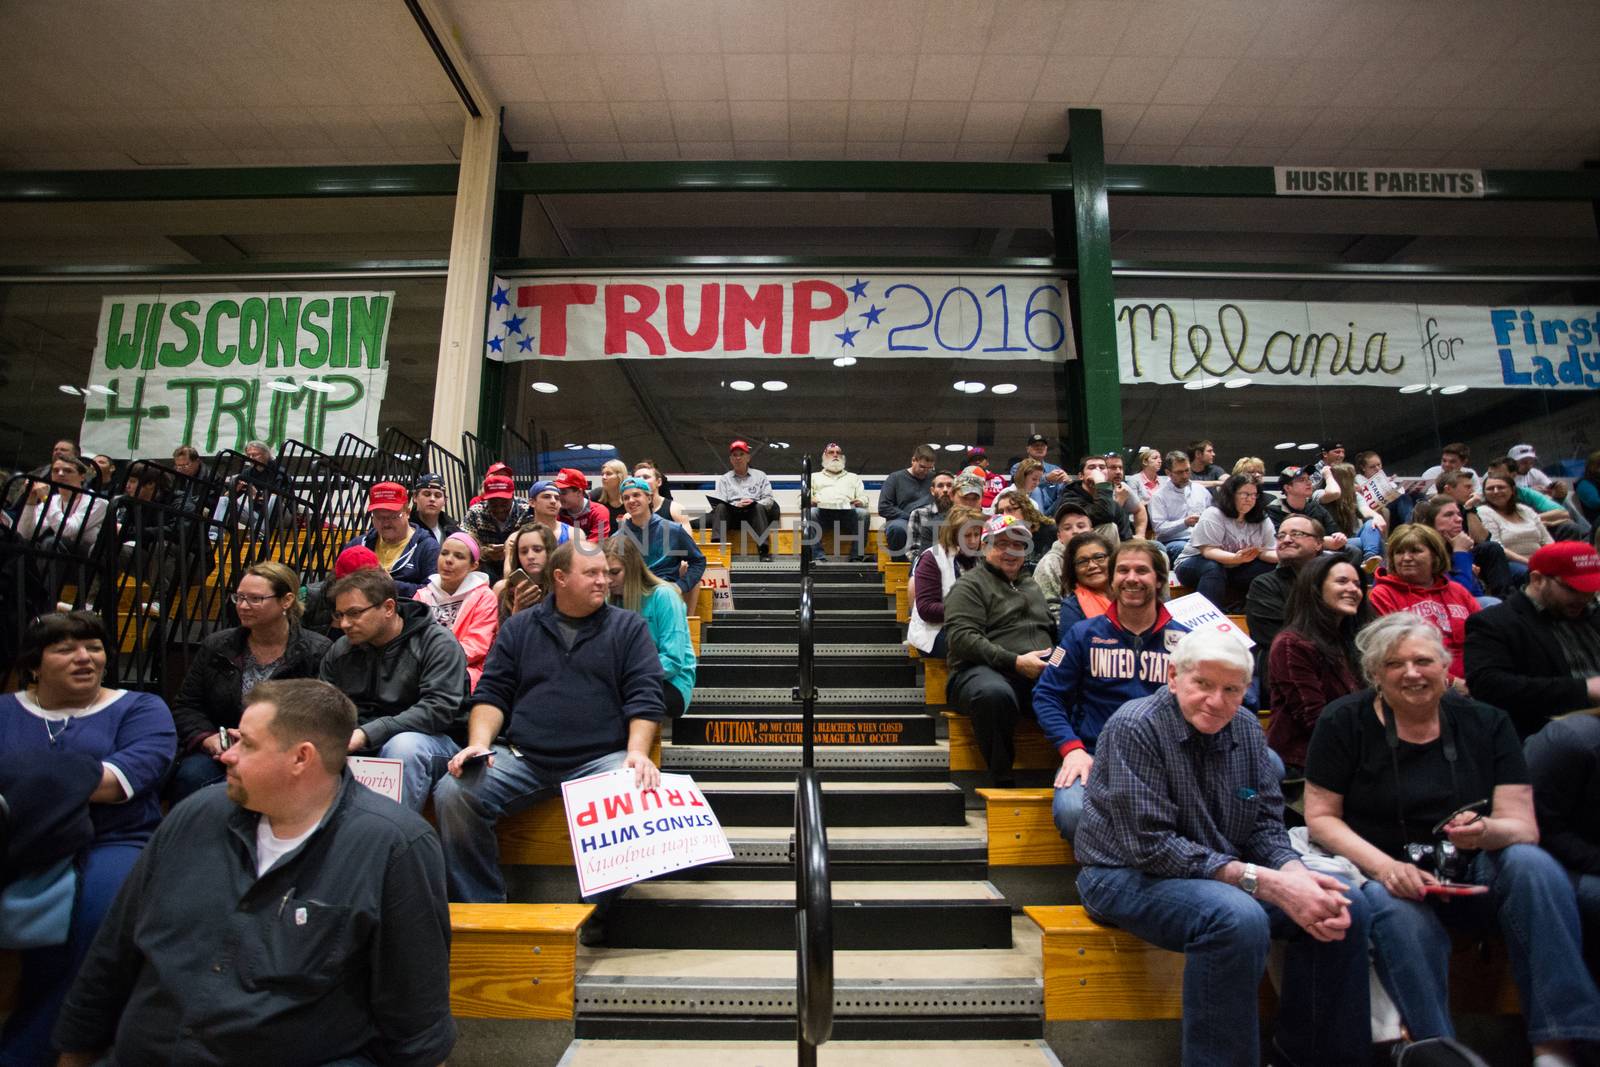 UNITED STATES, West Allis: Trump supporters wait for Republican presidential candidate Donald Trump to speak to guests during a campaign stop at Nathan Hale High School on April 2, 2016 in West Allis, Wisconsin. Wisconsin voters go to the polls for the state's primary on April 5, 2016.